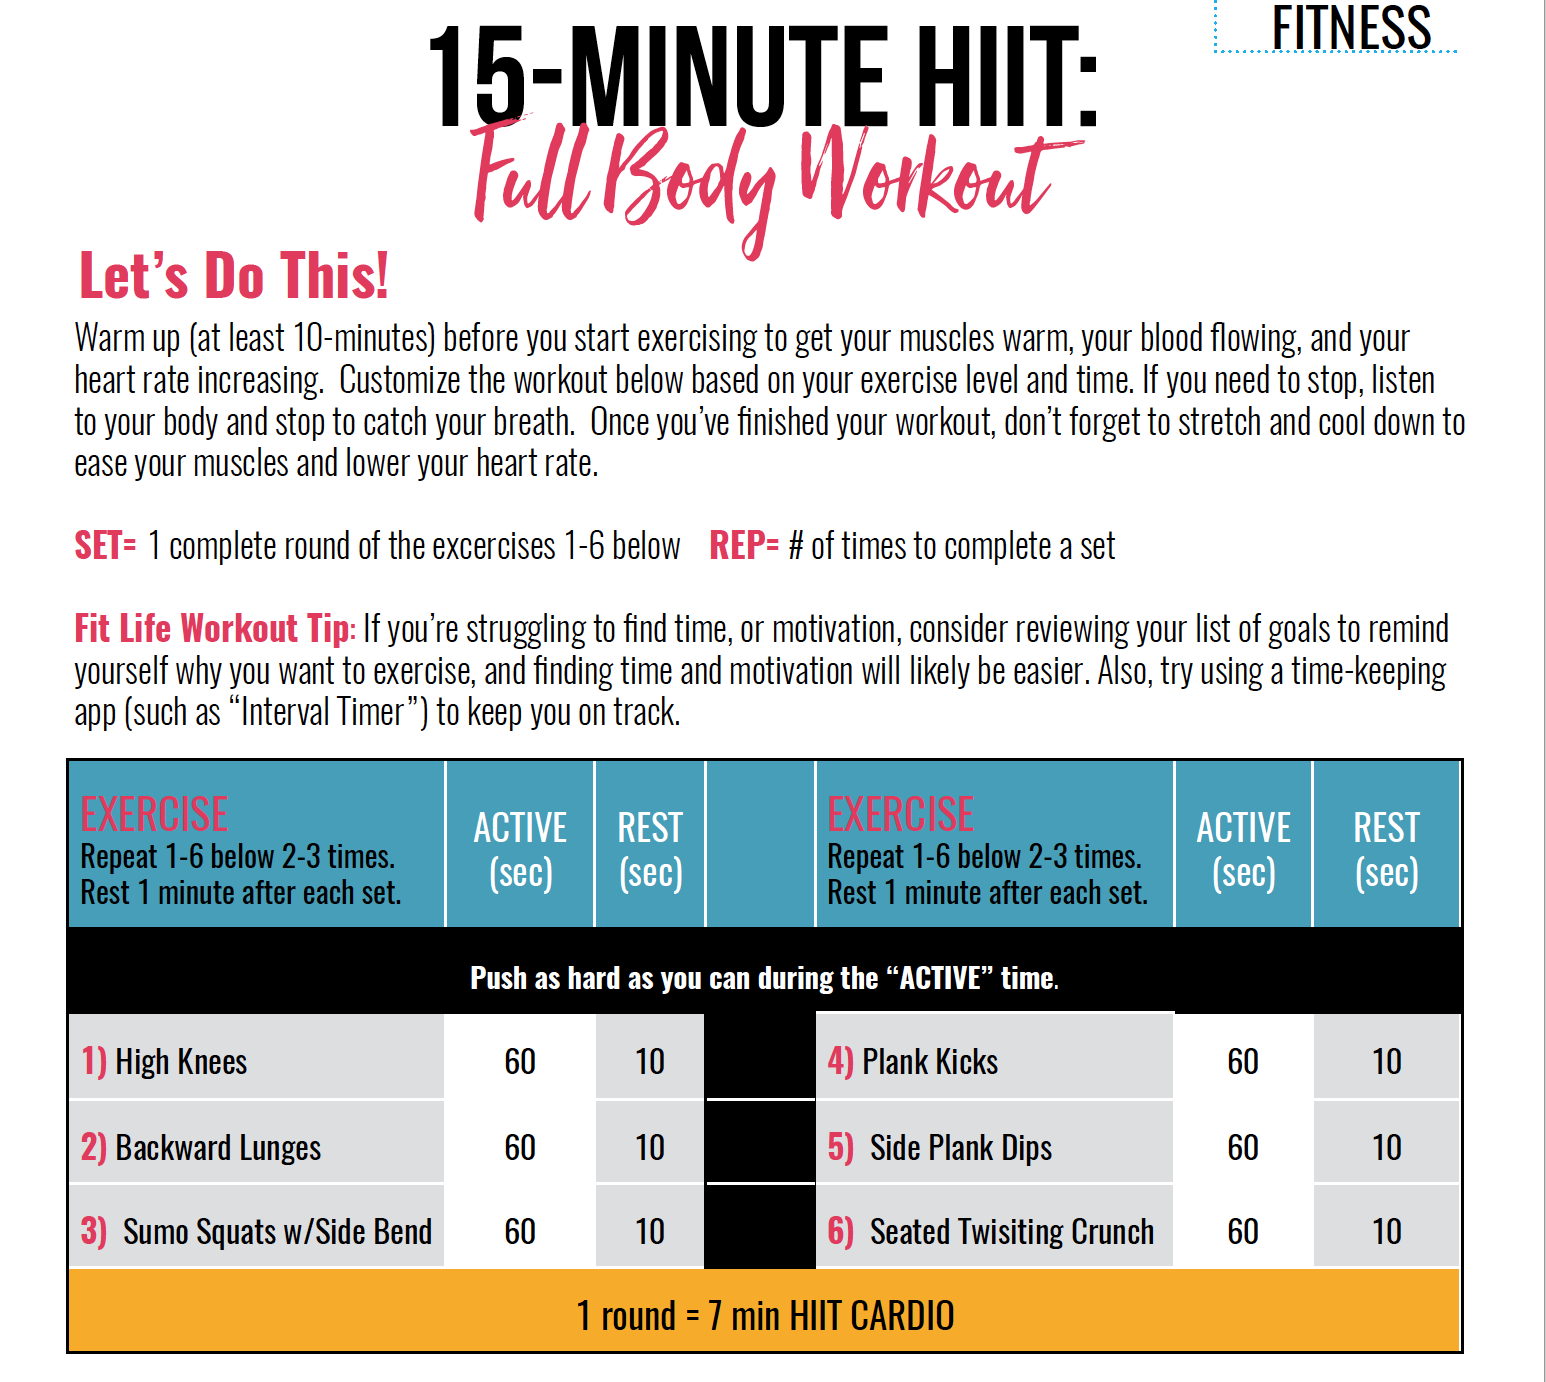 Full Body HIIT Workout - Fit Life with Fran